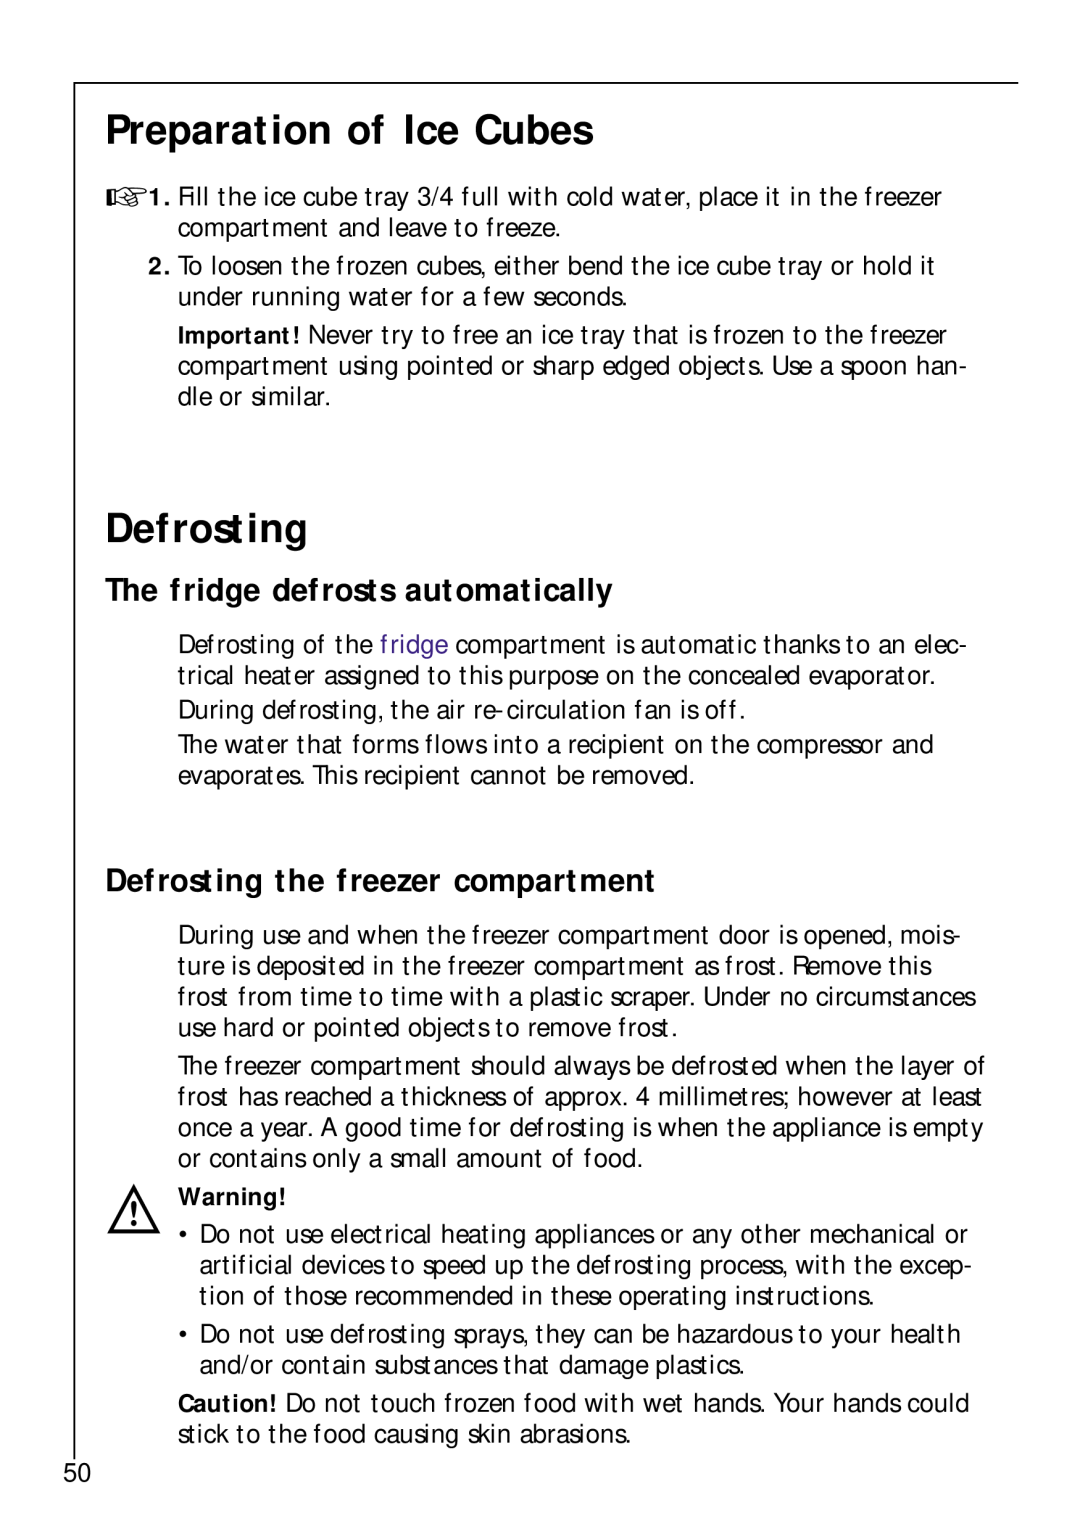 Electrolux Z 9 18 42-4 I user manual Preparation of Ice Cubes, Defrosting, The fridge defrosts automatically 